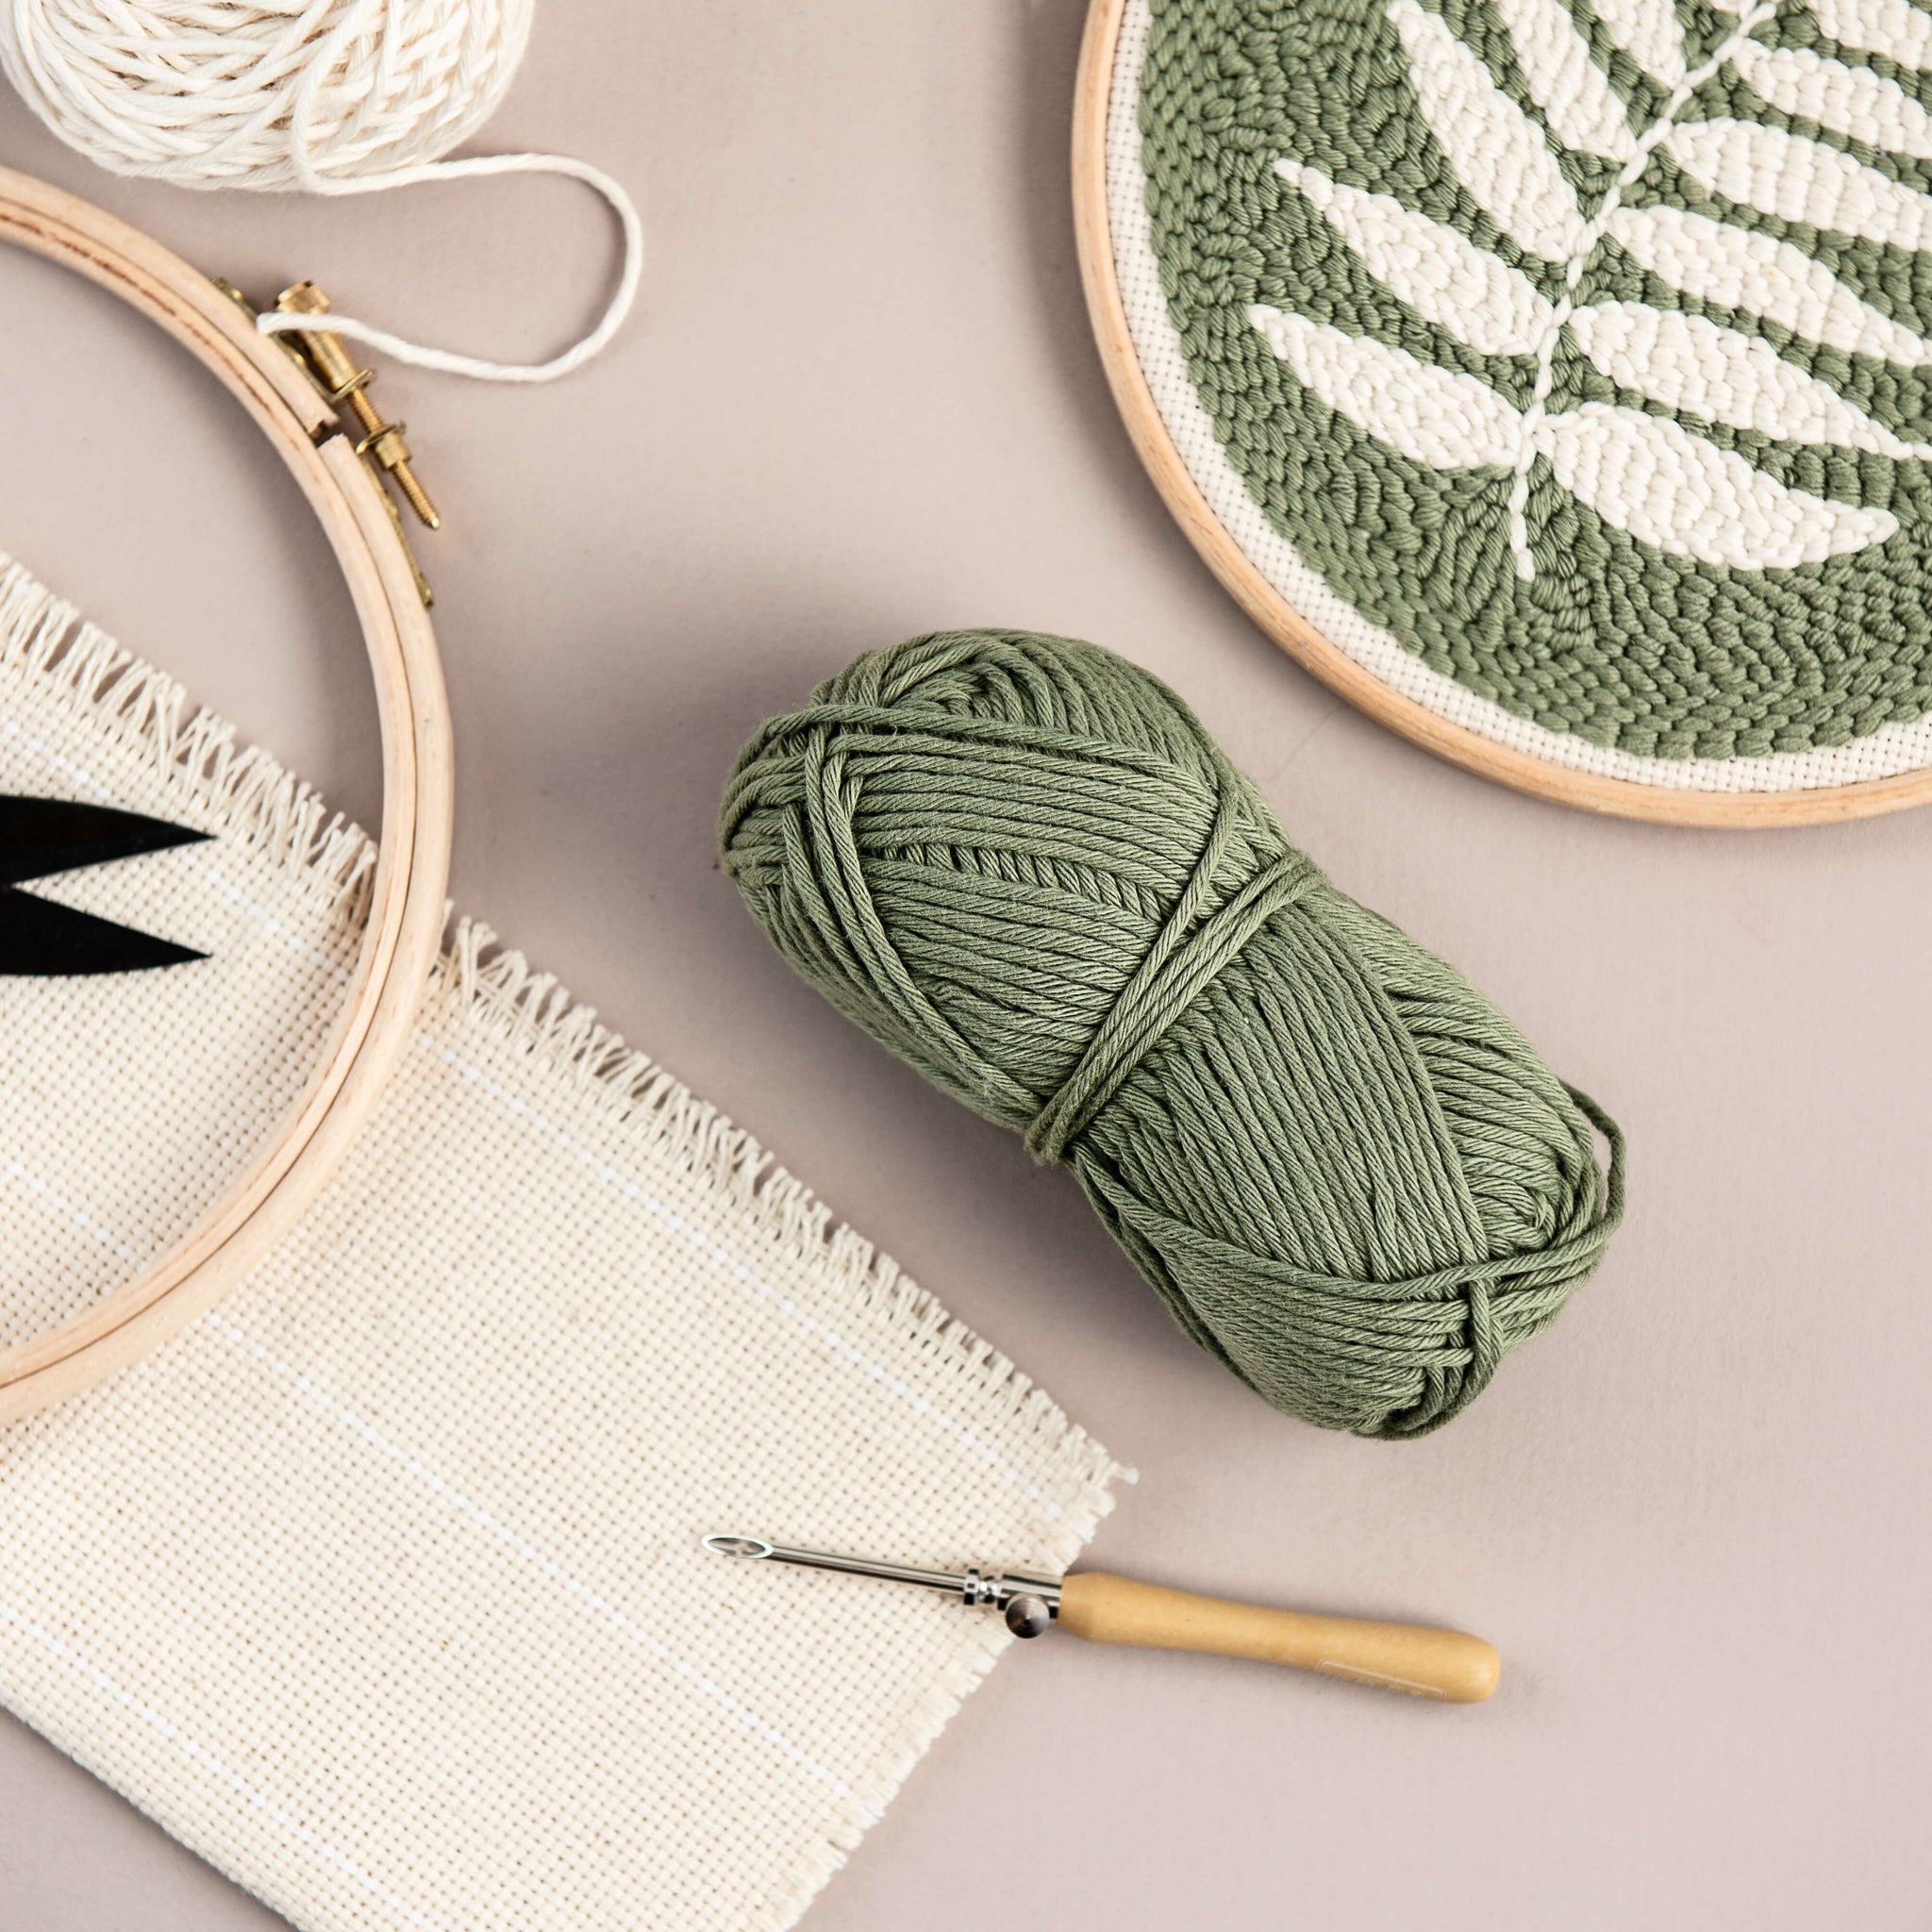 Punch Needle Embroidery for Beginners